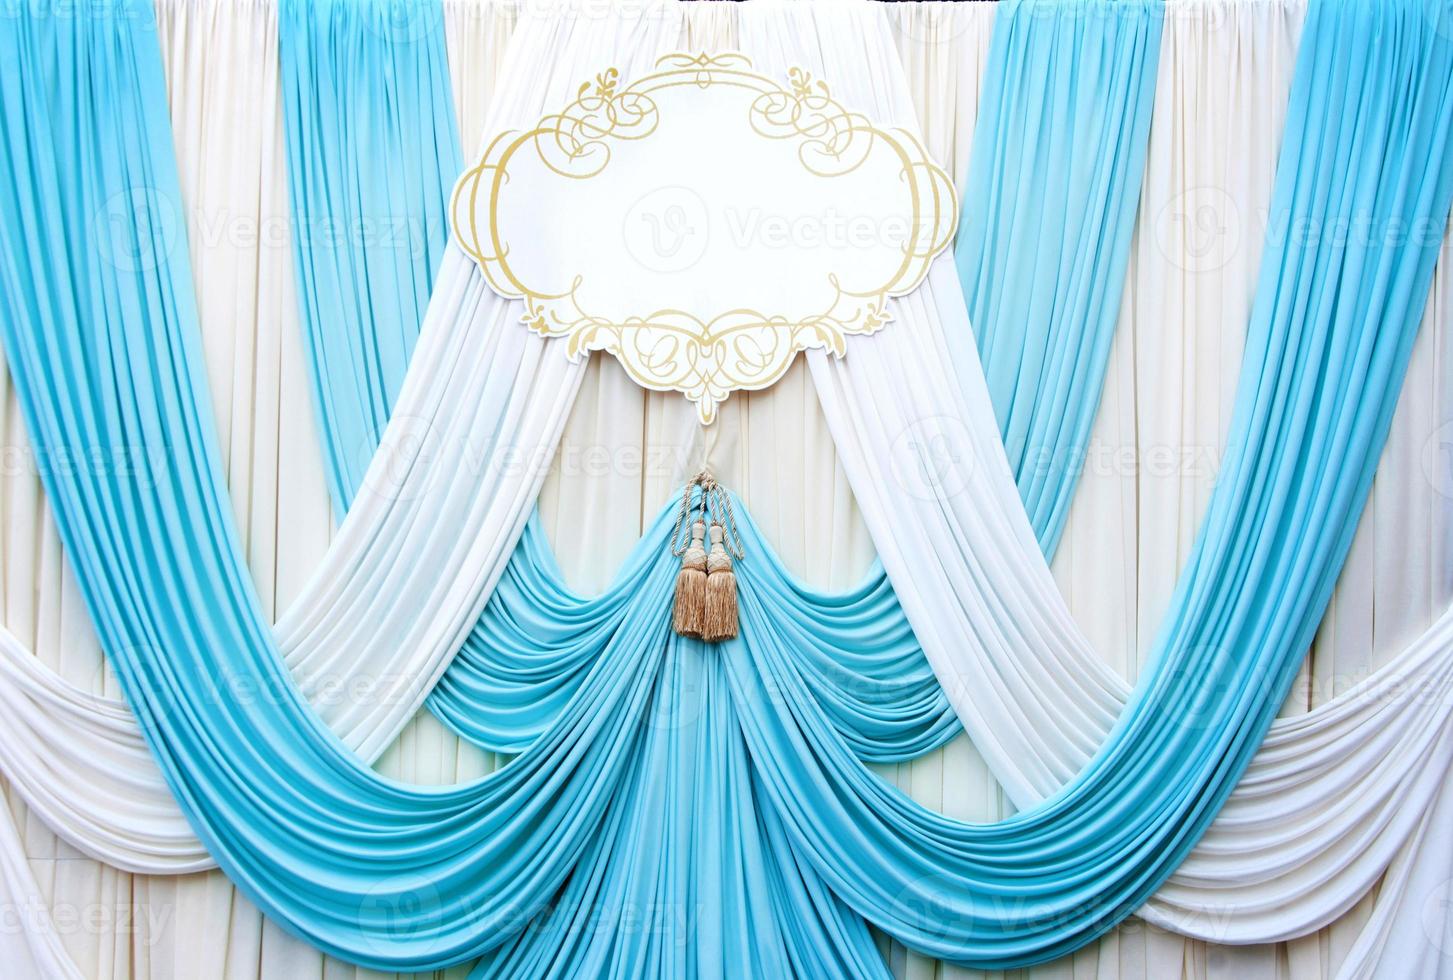 white and cyans curtain backdrop background 1103840 Stock Photo at Vecteezy